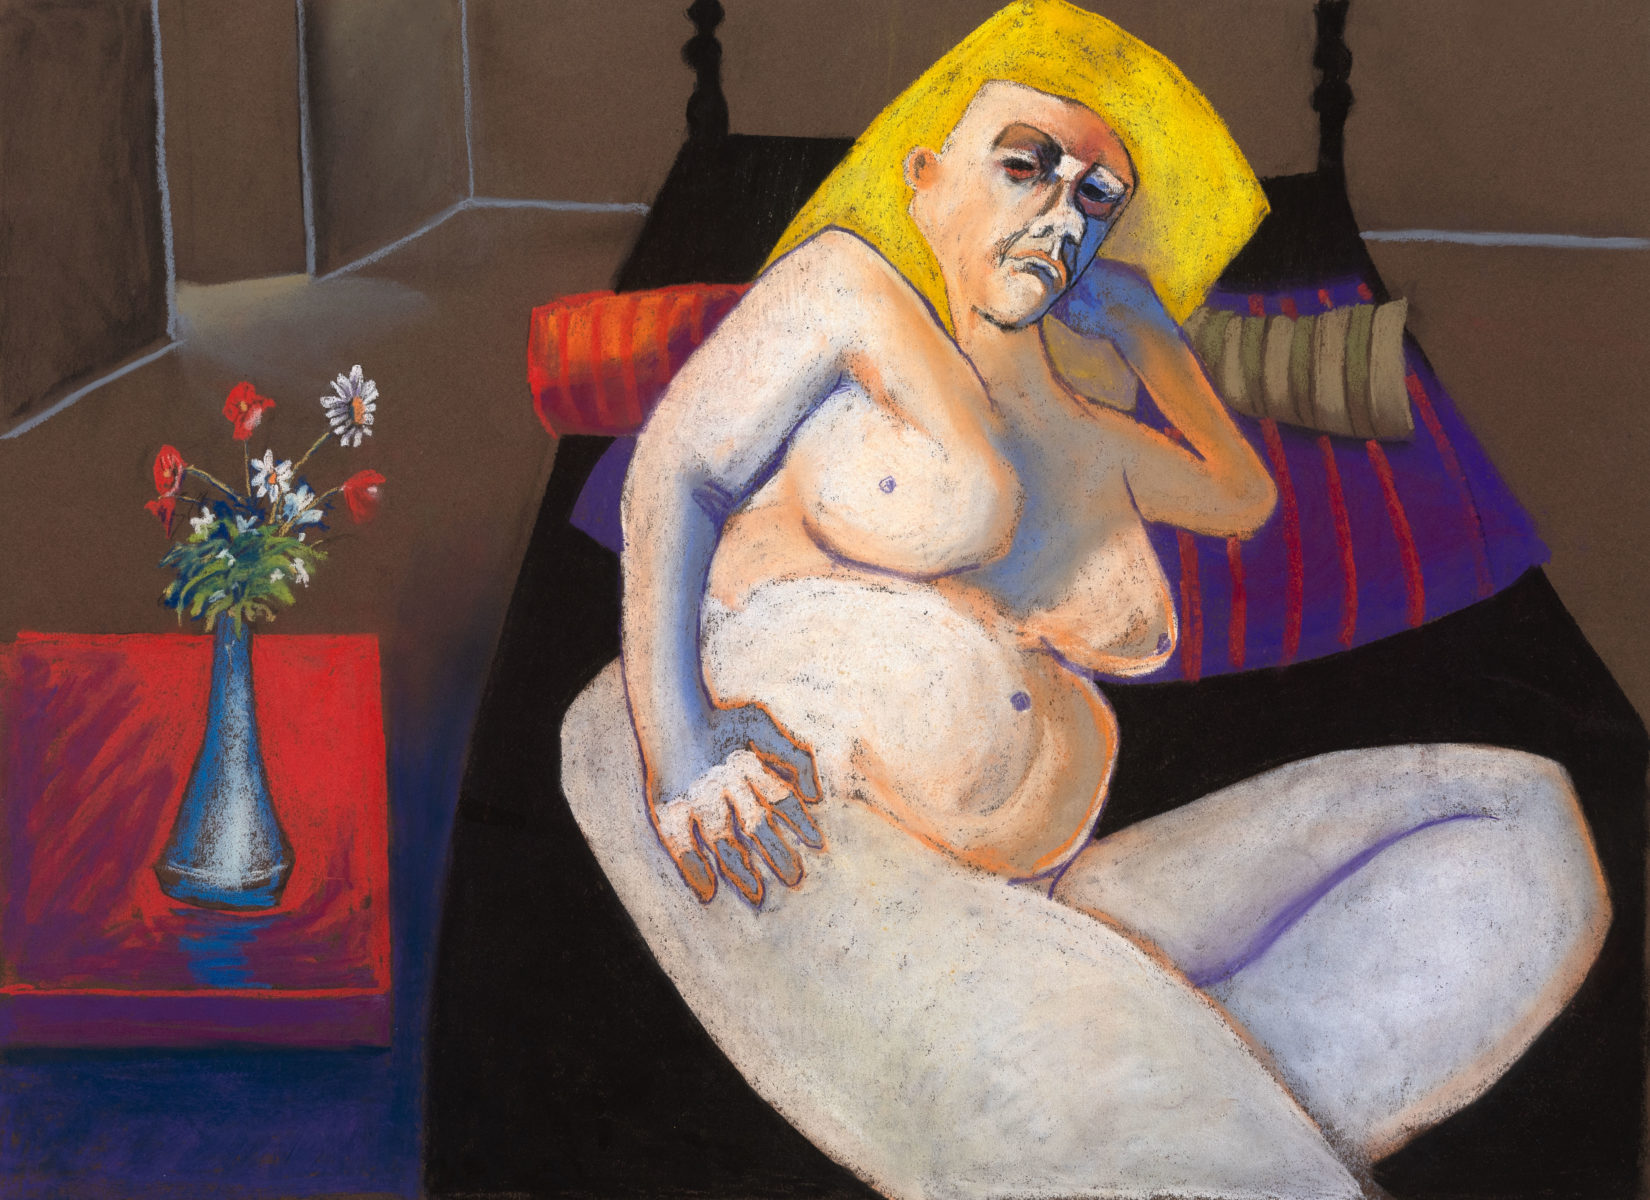 The Black Bed | Bob Smith | Soft pastels on paper | unframed | $1500